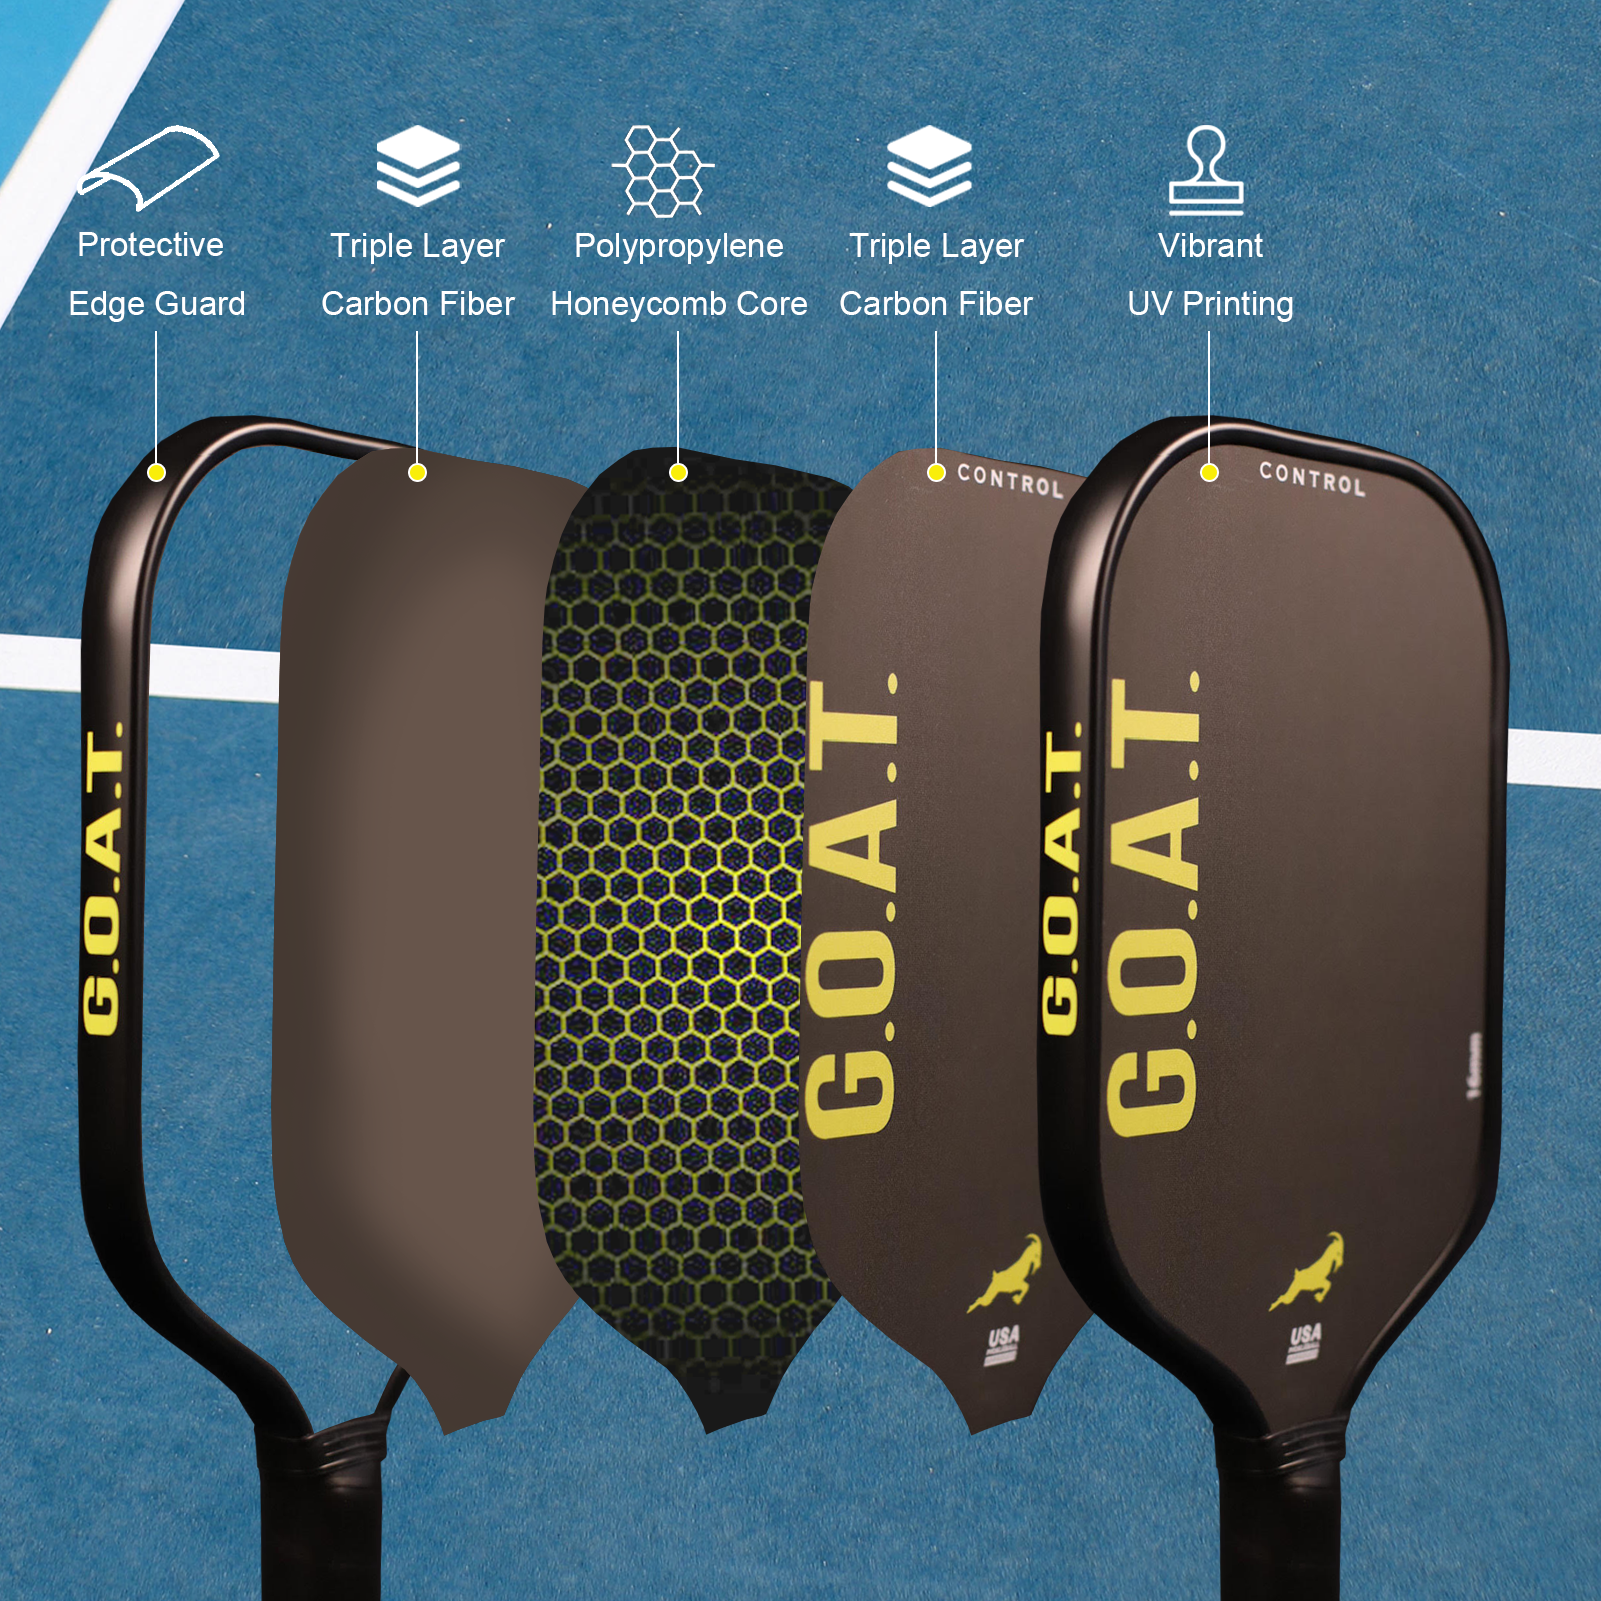 GOAT Control Pickleball Paddle infographic: Ultra-light, 3-layer carbon fiber paddle on white. Features edge guard, honeycomb core, sunset blue. Key features Vibrant UV Printing, Polypropylene Honeycomb Core, Protective Edge Guard.